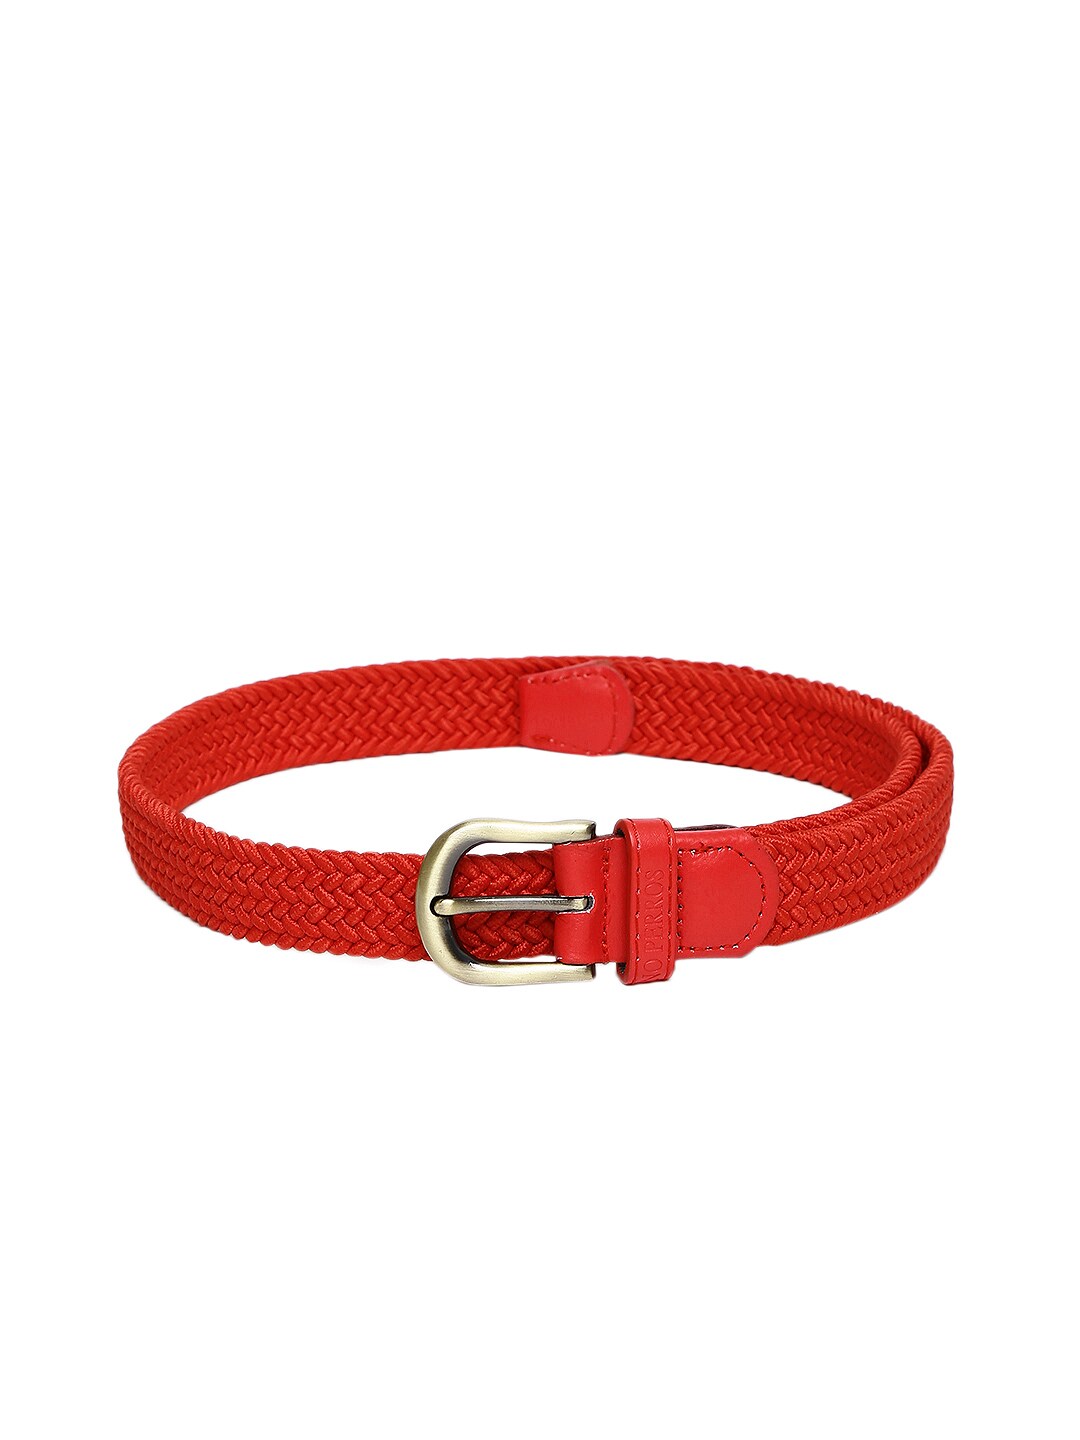 Lino Perros Women Red Textured Belt Price in India